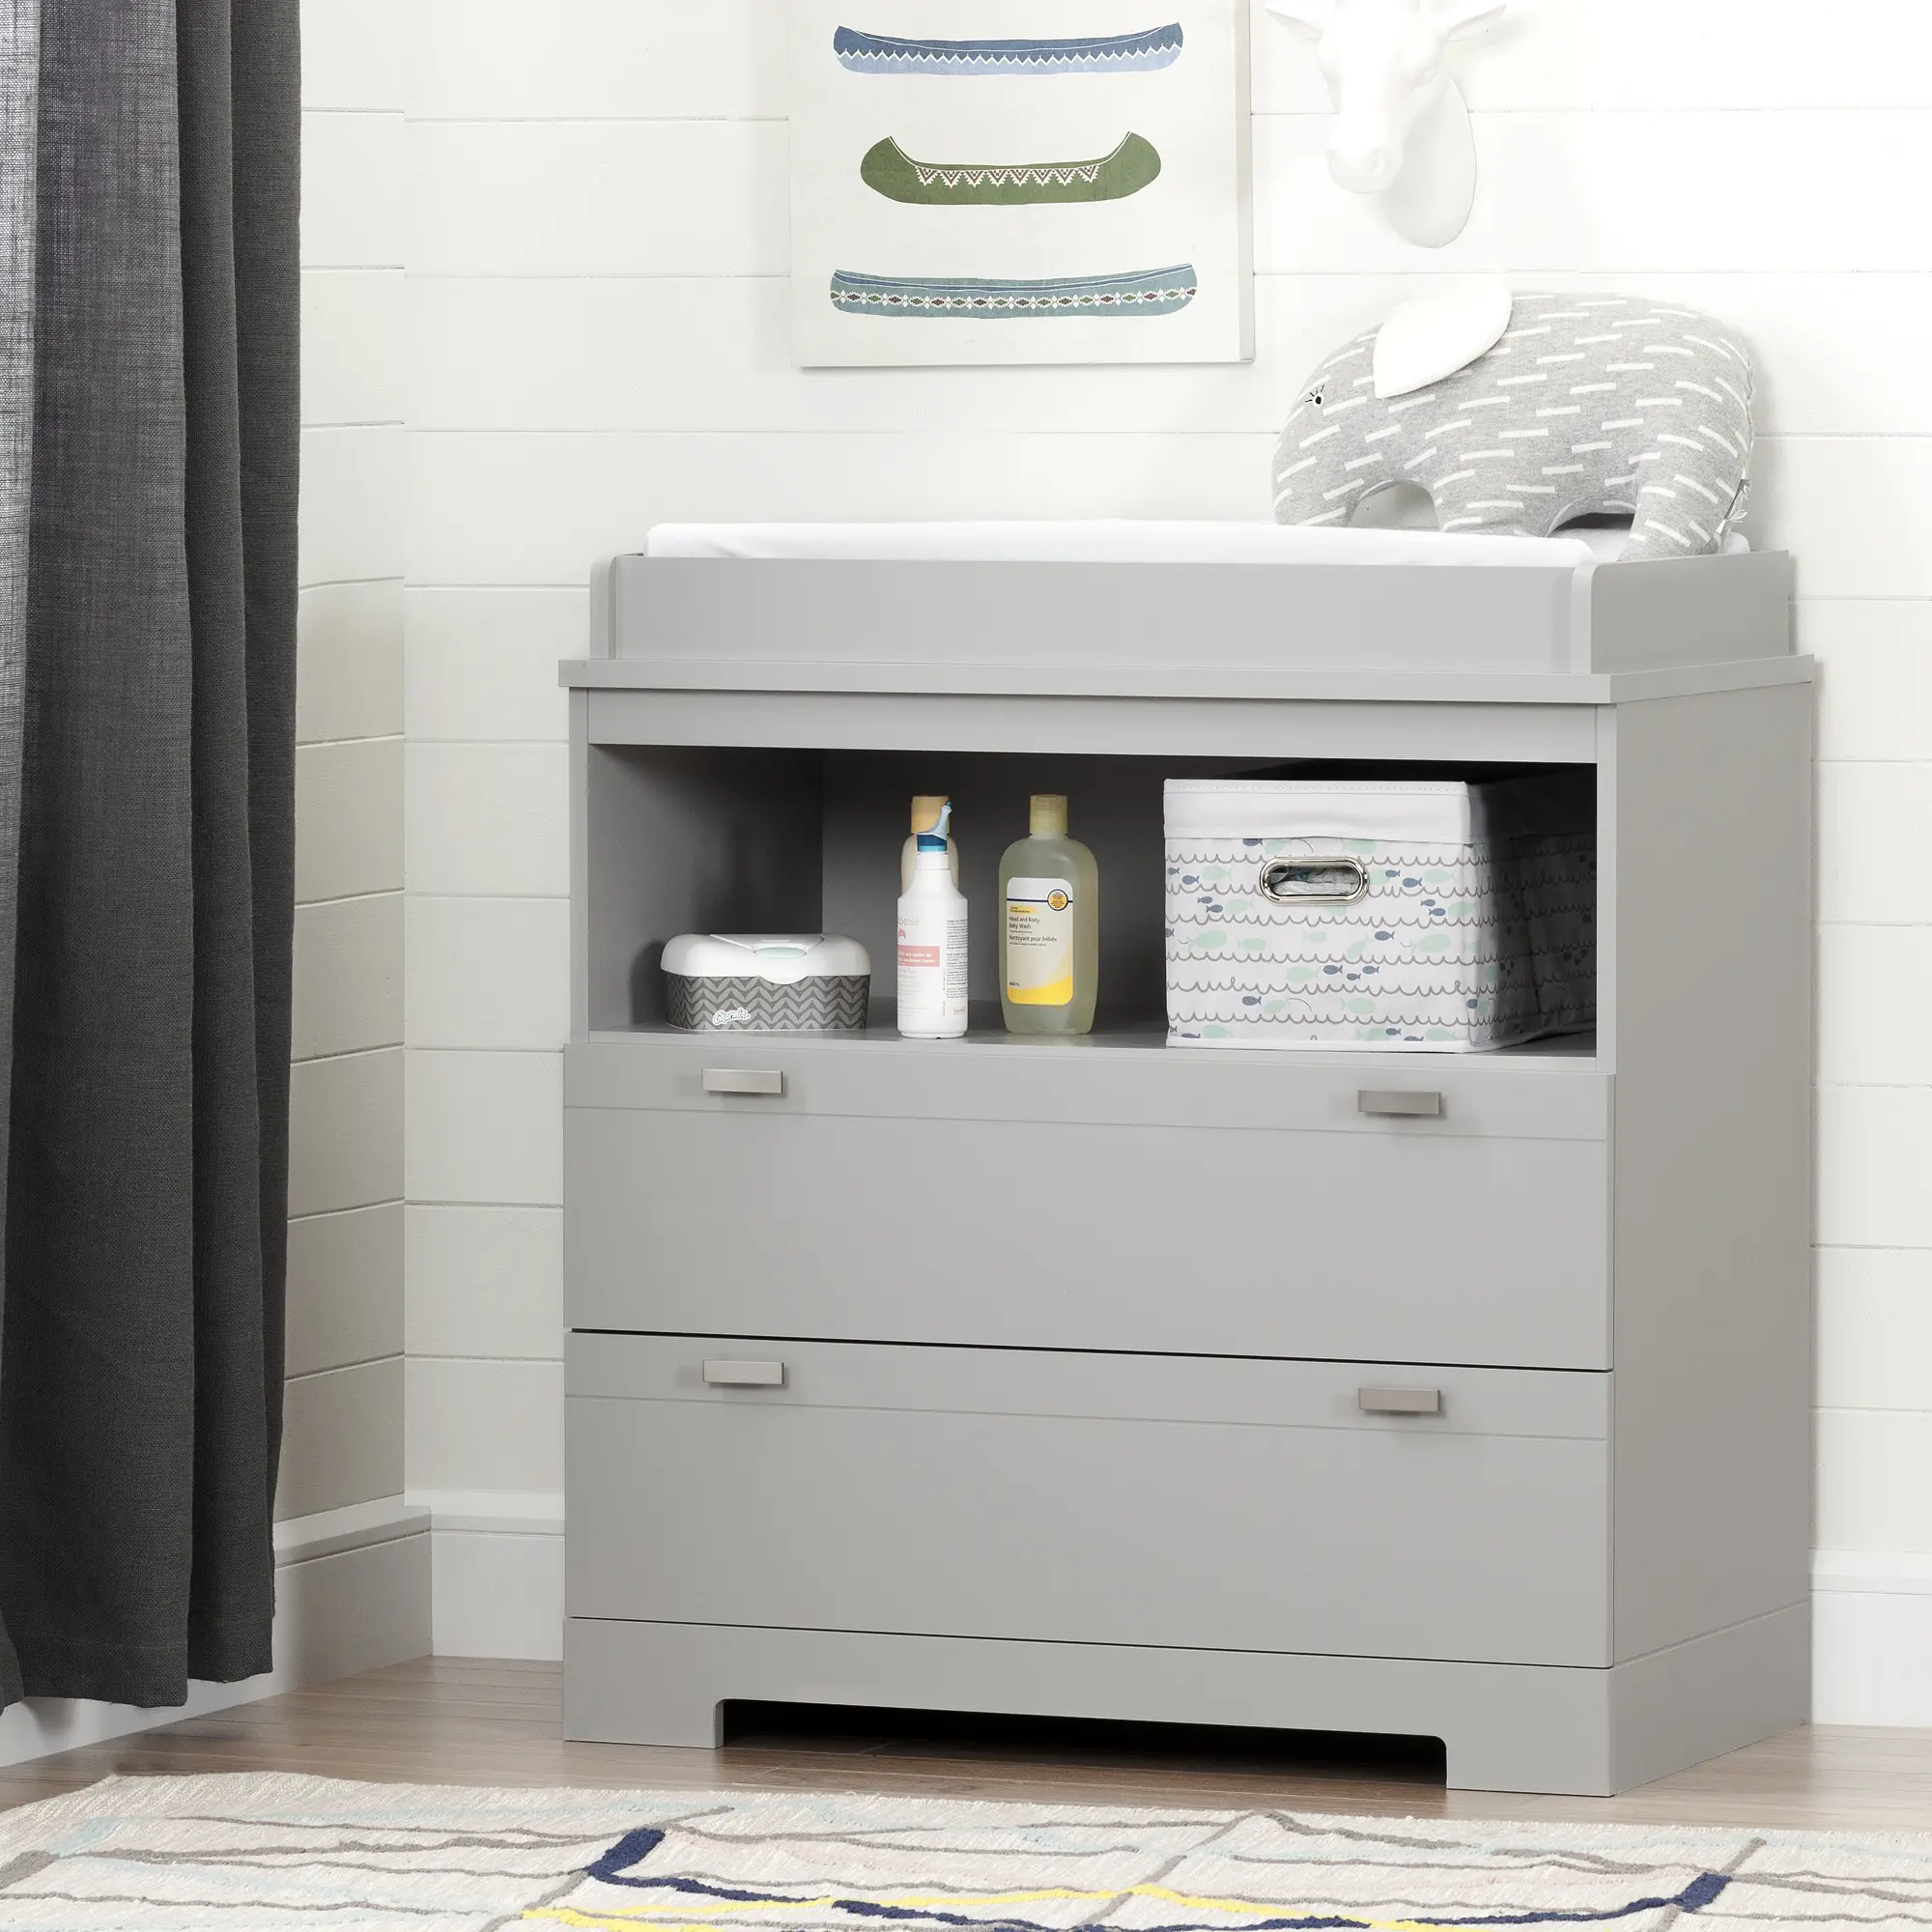 10272 Reevo Gray Changing Table with Storage - South Sho sku 10272